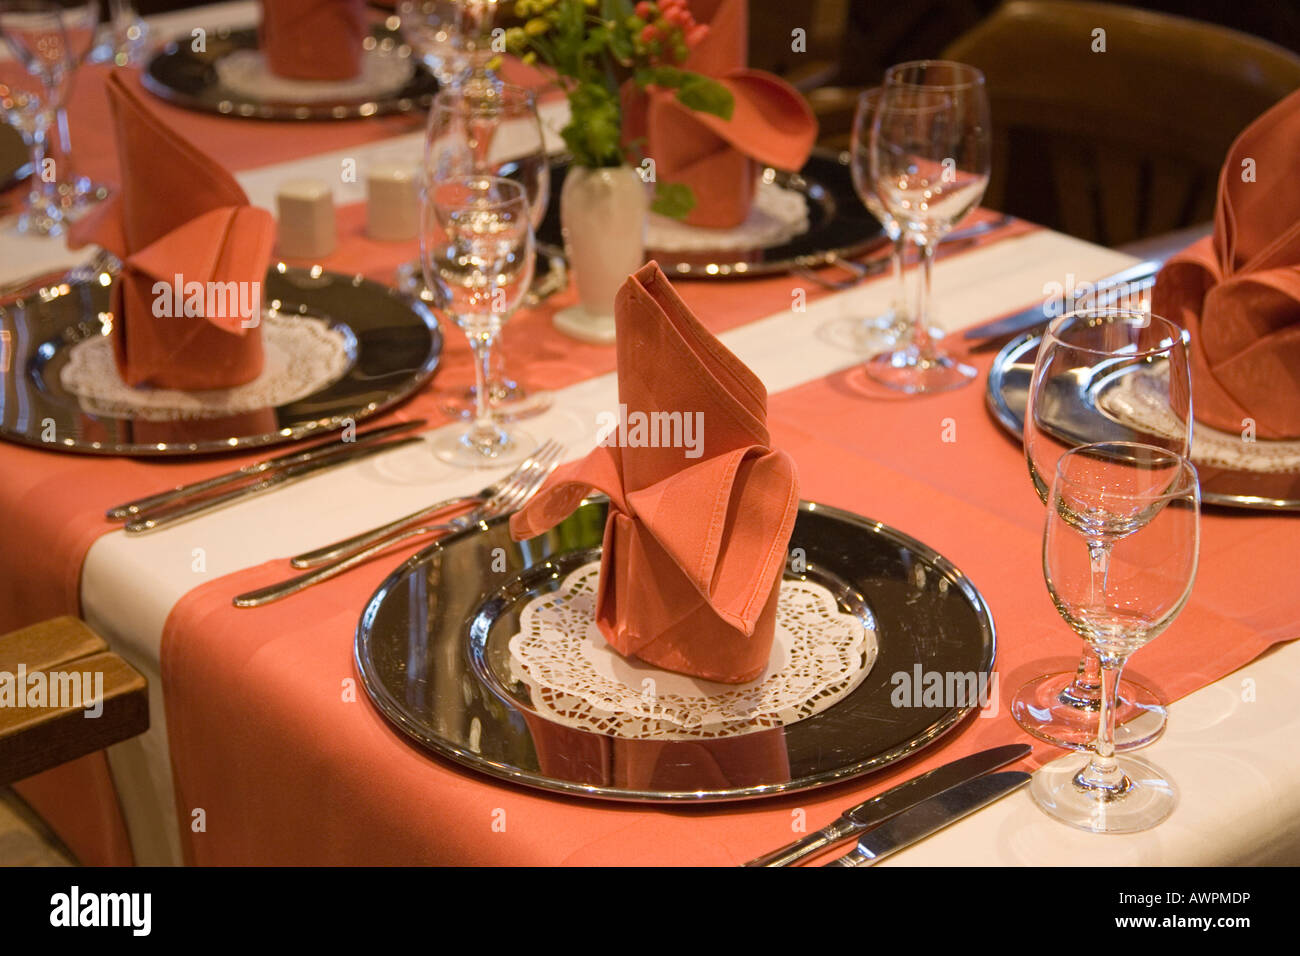 Elegant well-laid table in a gourmet restaurant Stock Photo